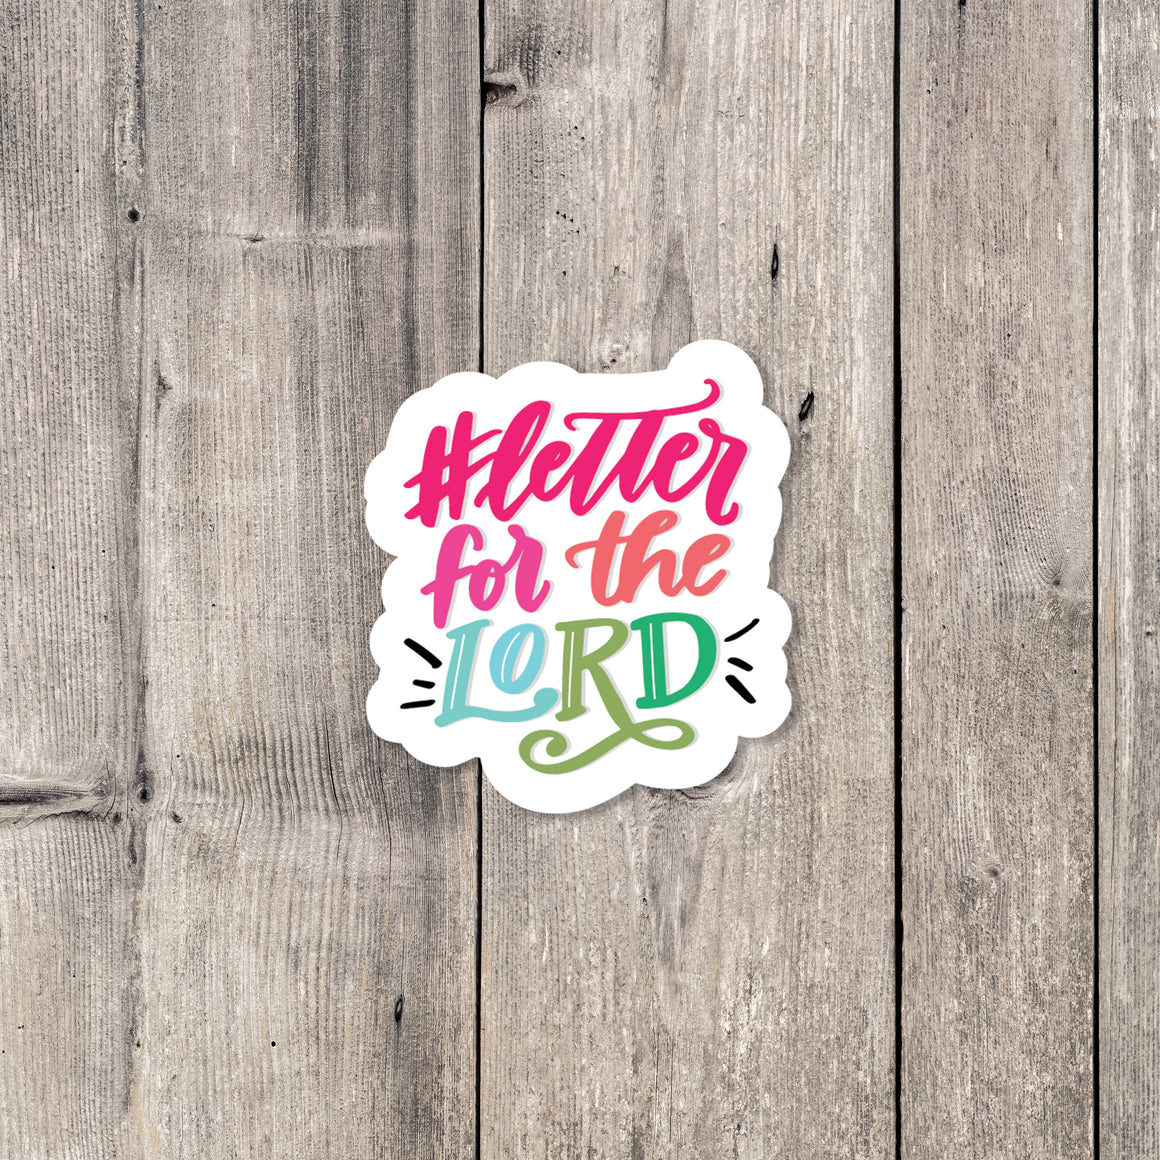 "Letter For the Lord" sticker